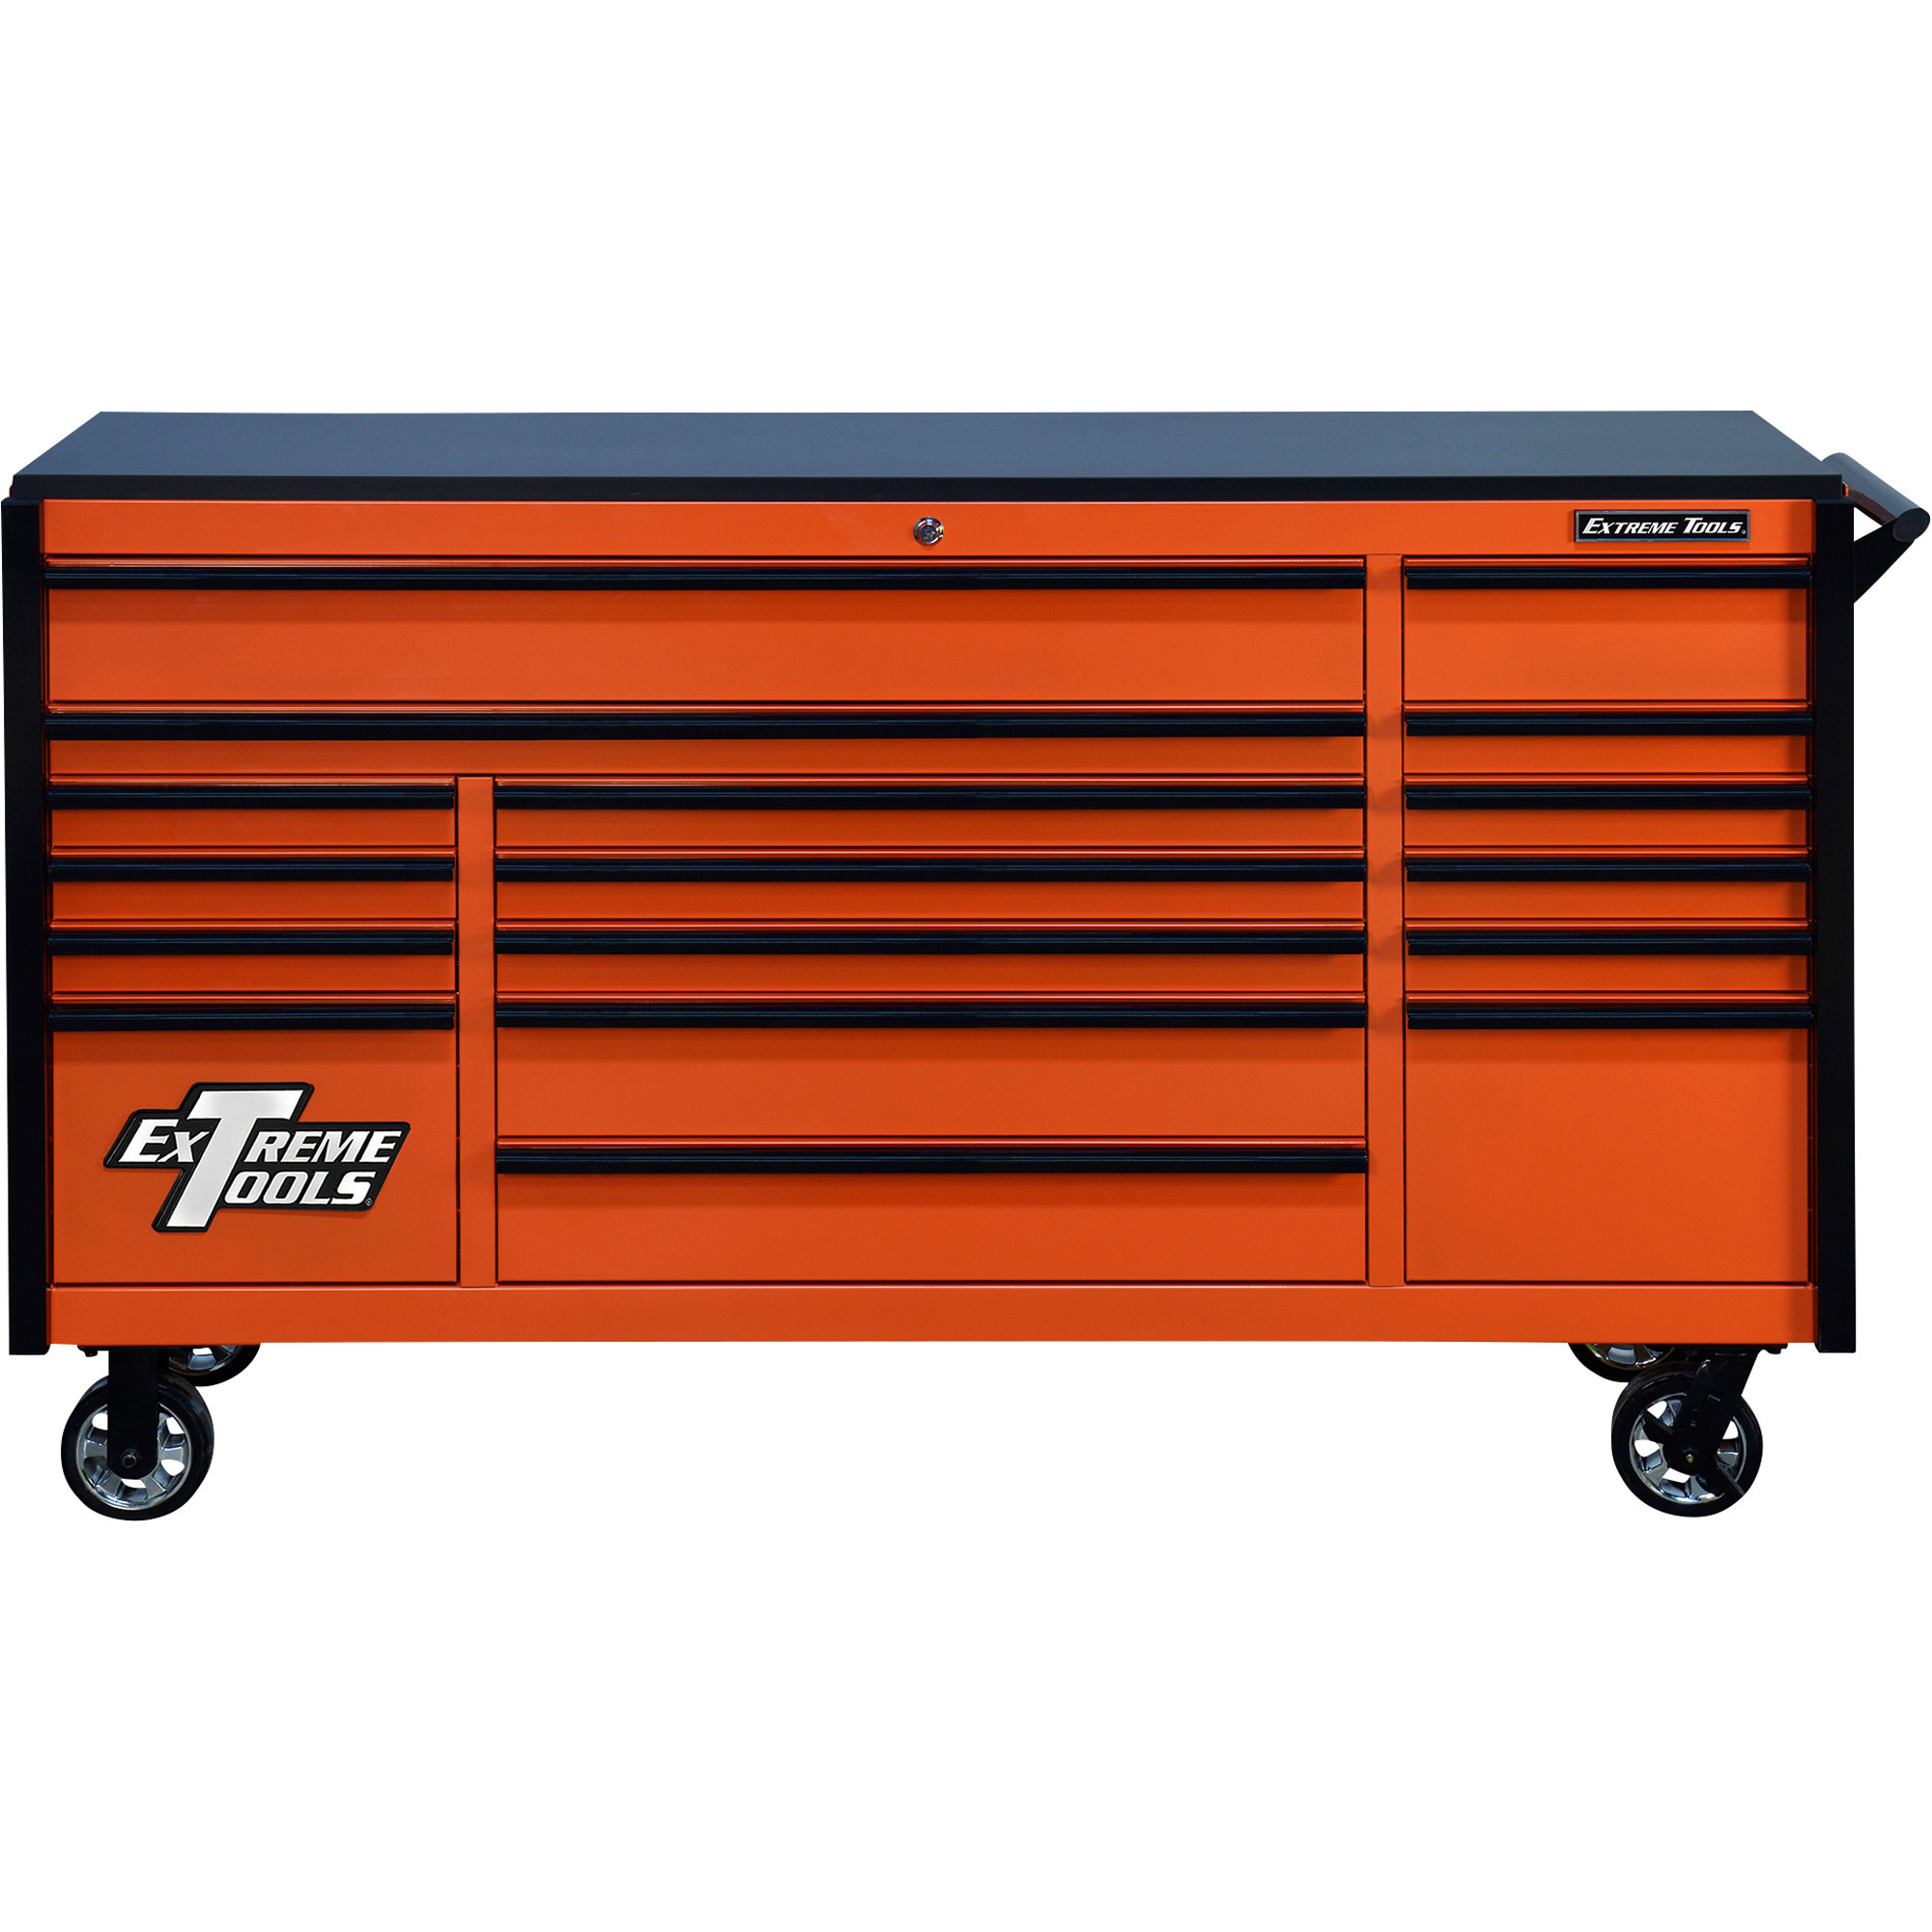 Extreme Tools DX Series 72Inch 17-Drawer Triple Bank Roller Cabinet â 72Inch W x 21Inch D x 42.7Inch H, Orange/Black, Model DX722117RCORBK